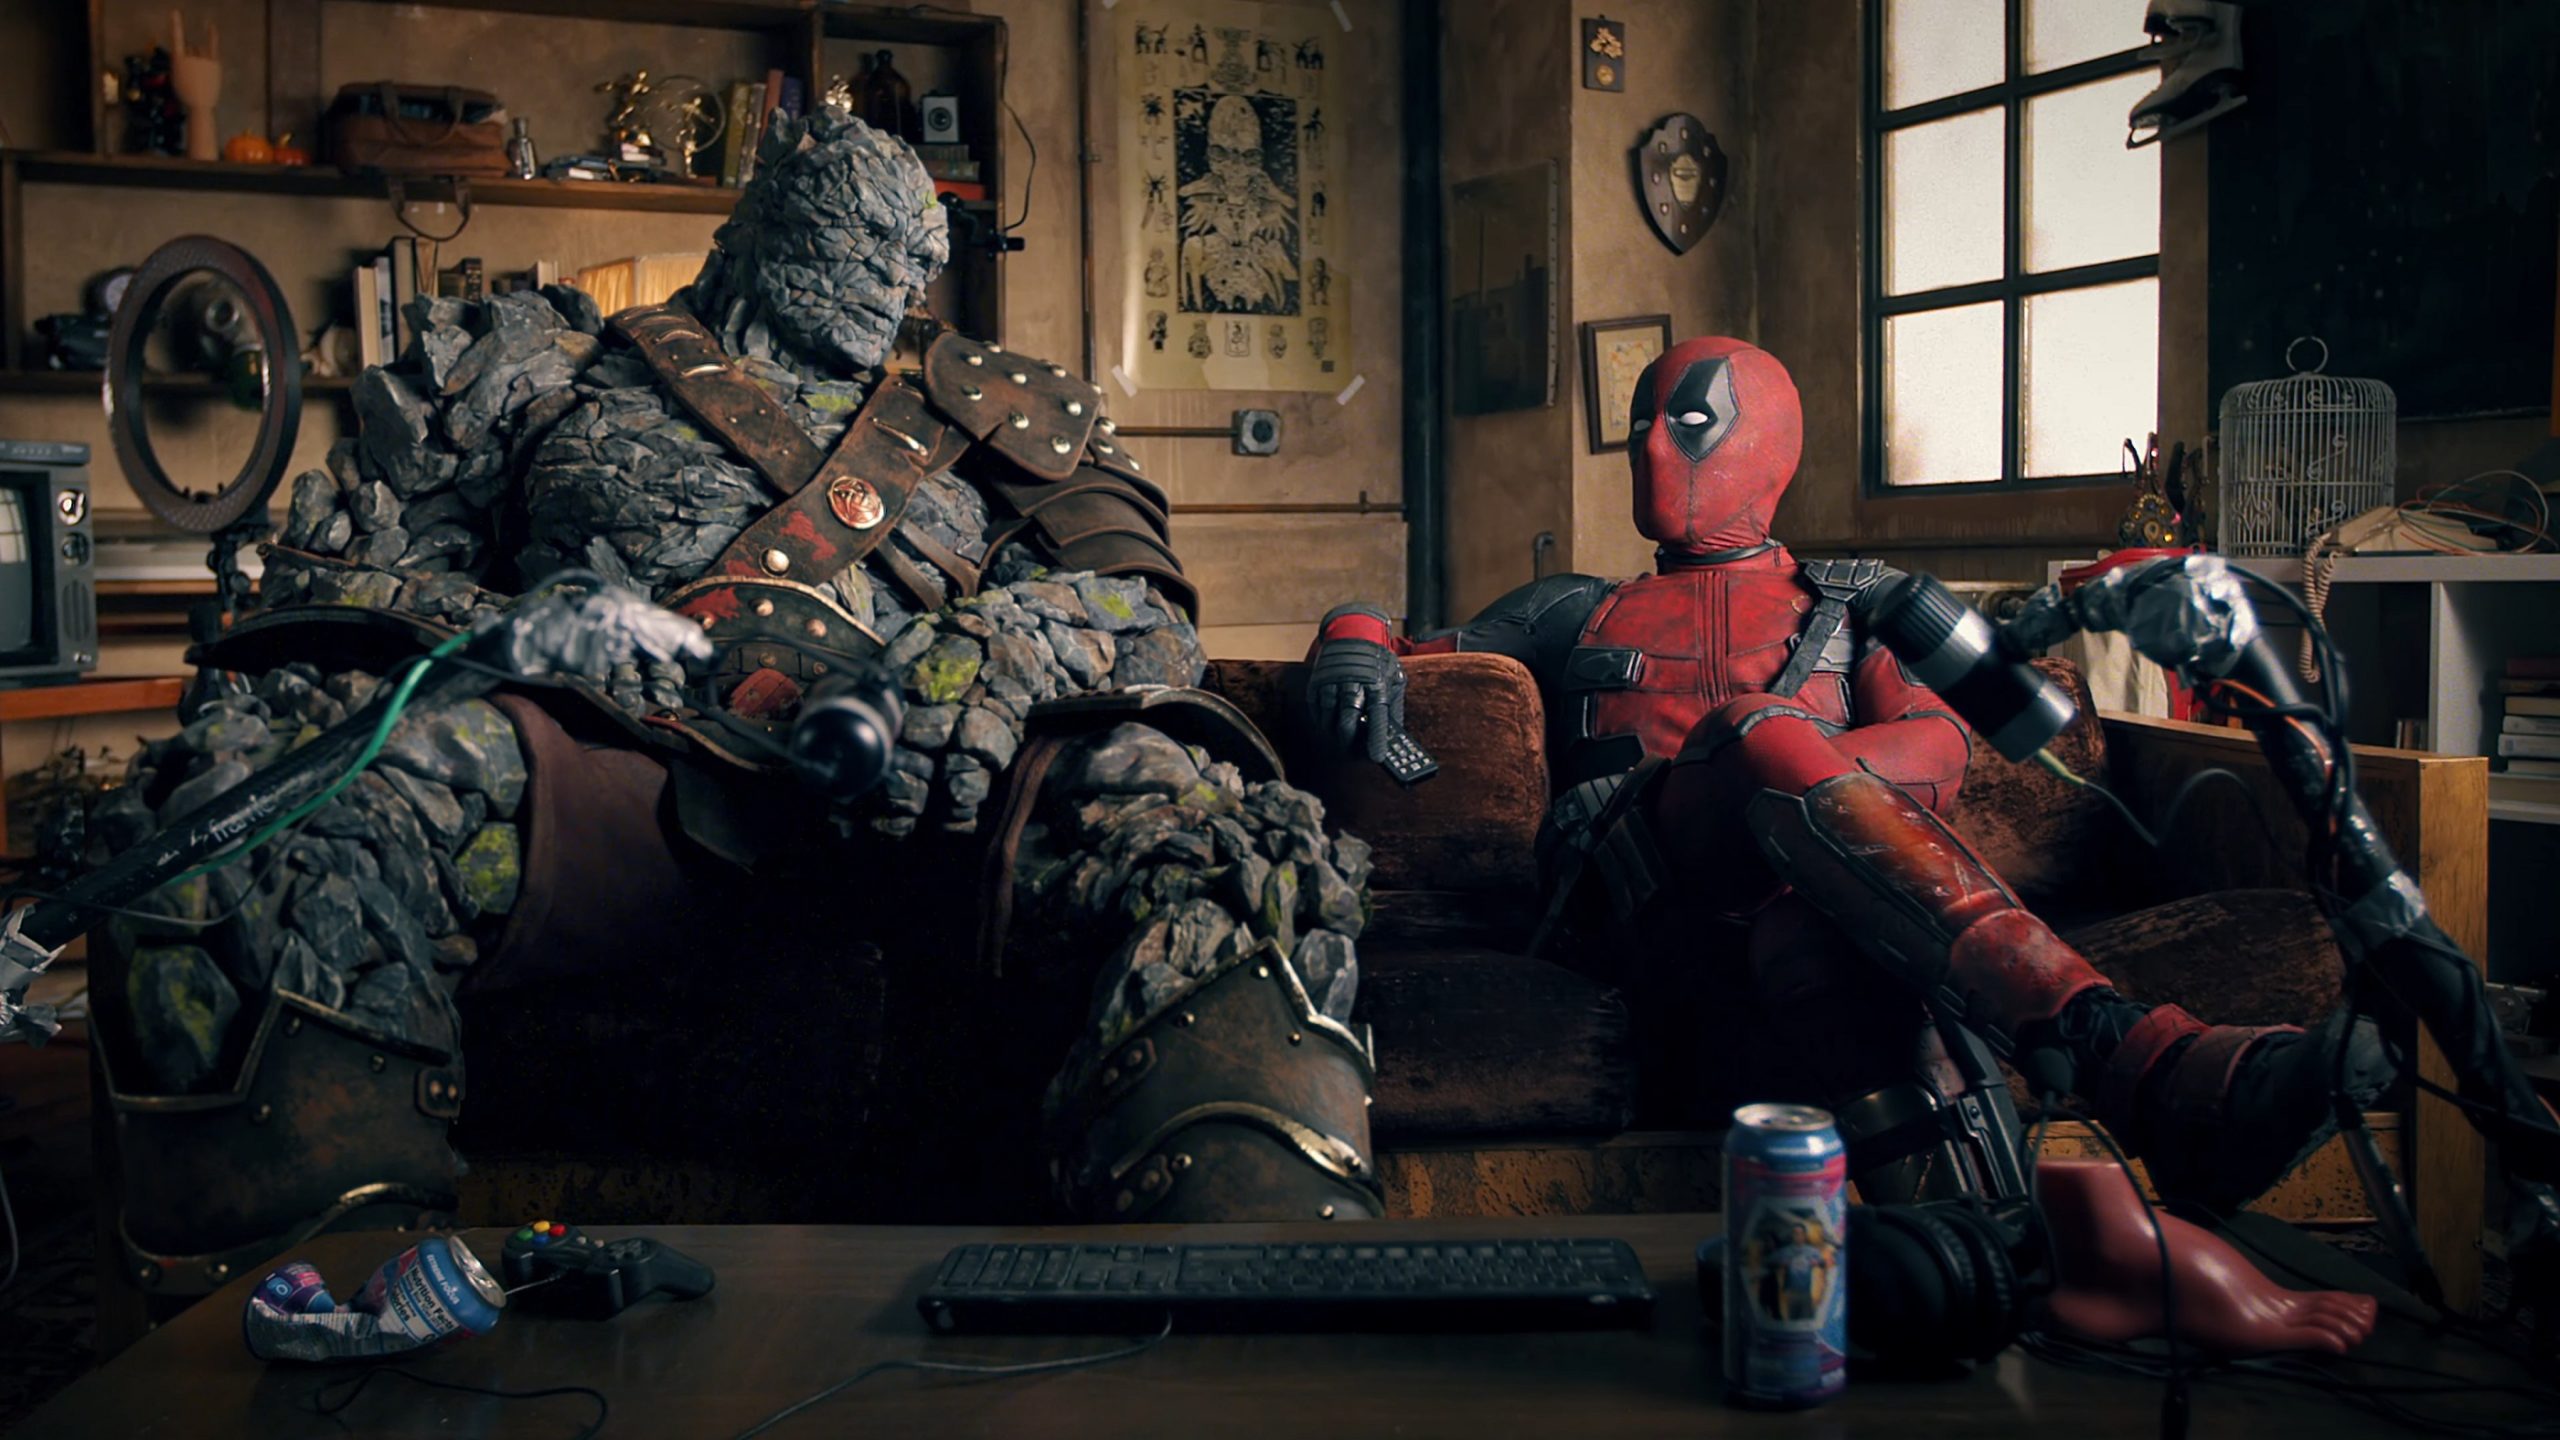 Here are the ways we know Deadpool will be joining the Avengers